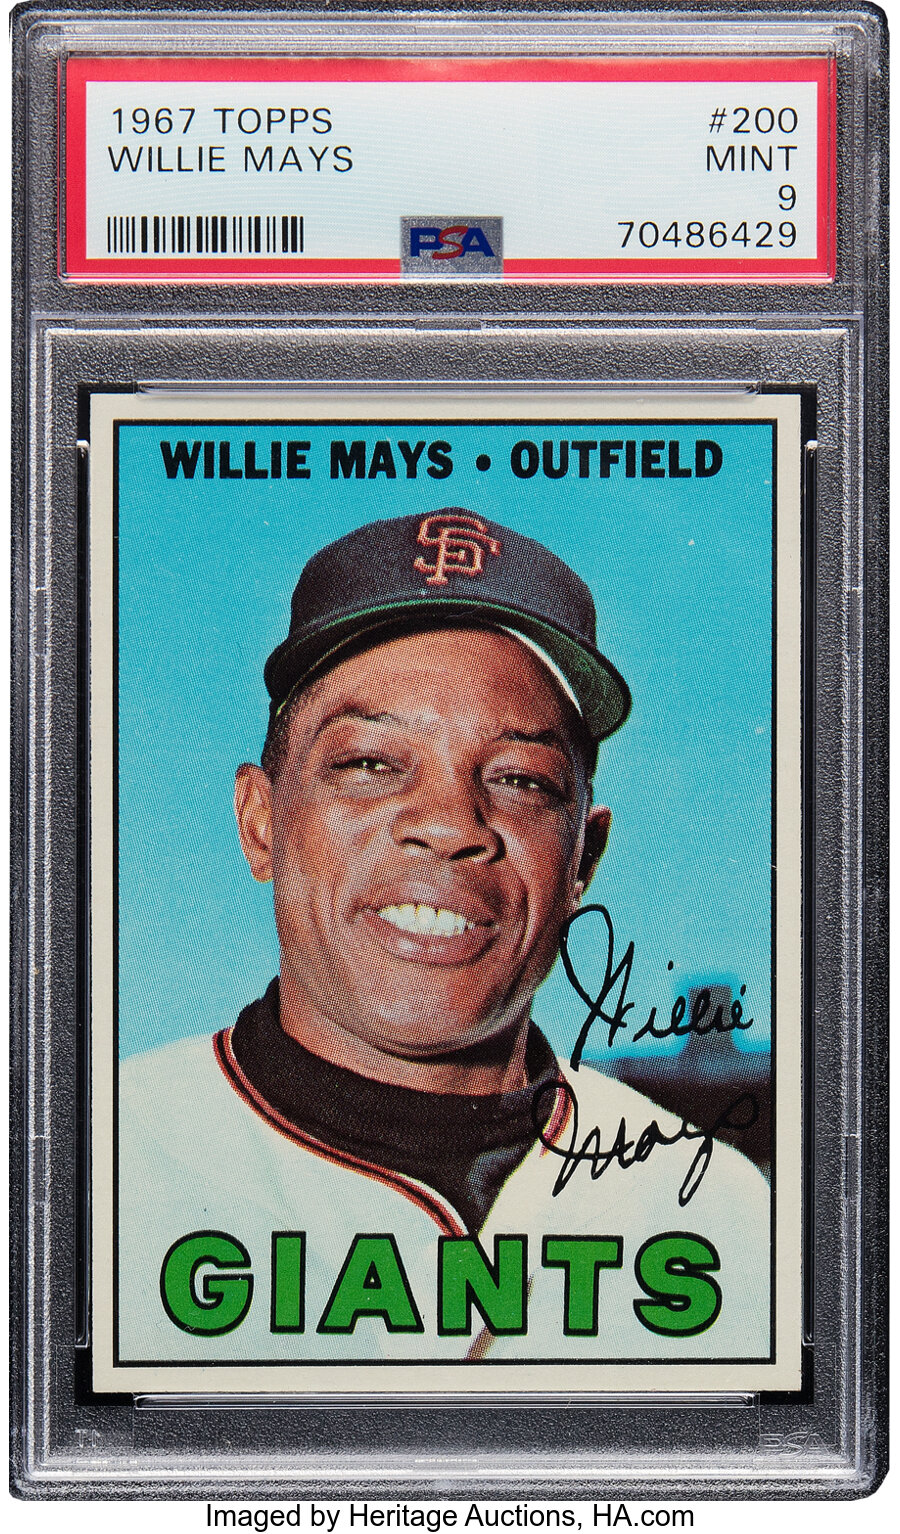 1967 Topps Willie Mays #200 PSA Mint 9 - None Higher!